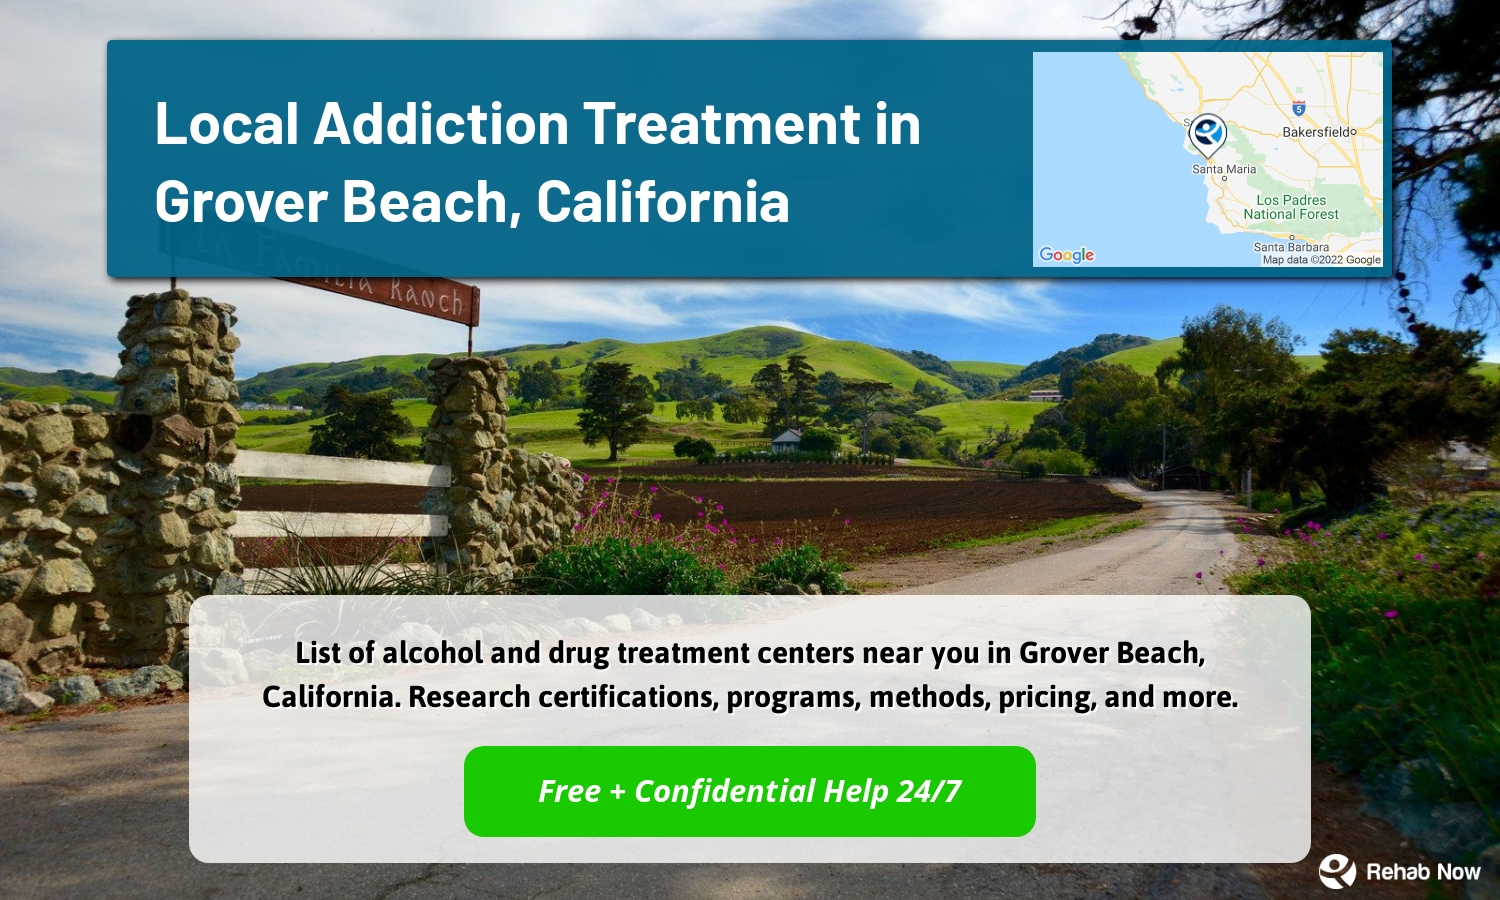 List of alcohol and drug treatment centers near you in Grover Beach, California. Research certifications, programs, methods, pricing, and more.